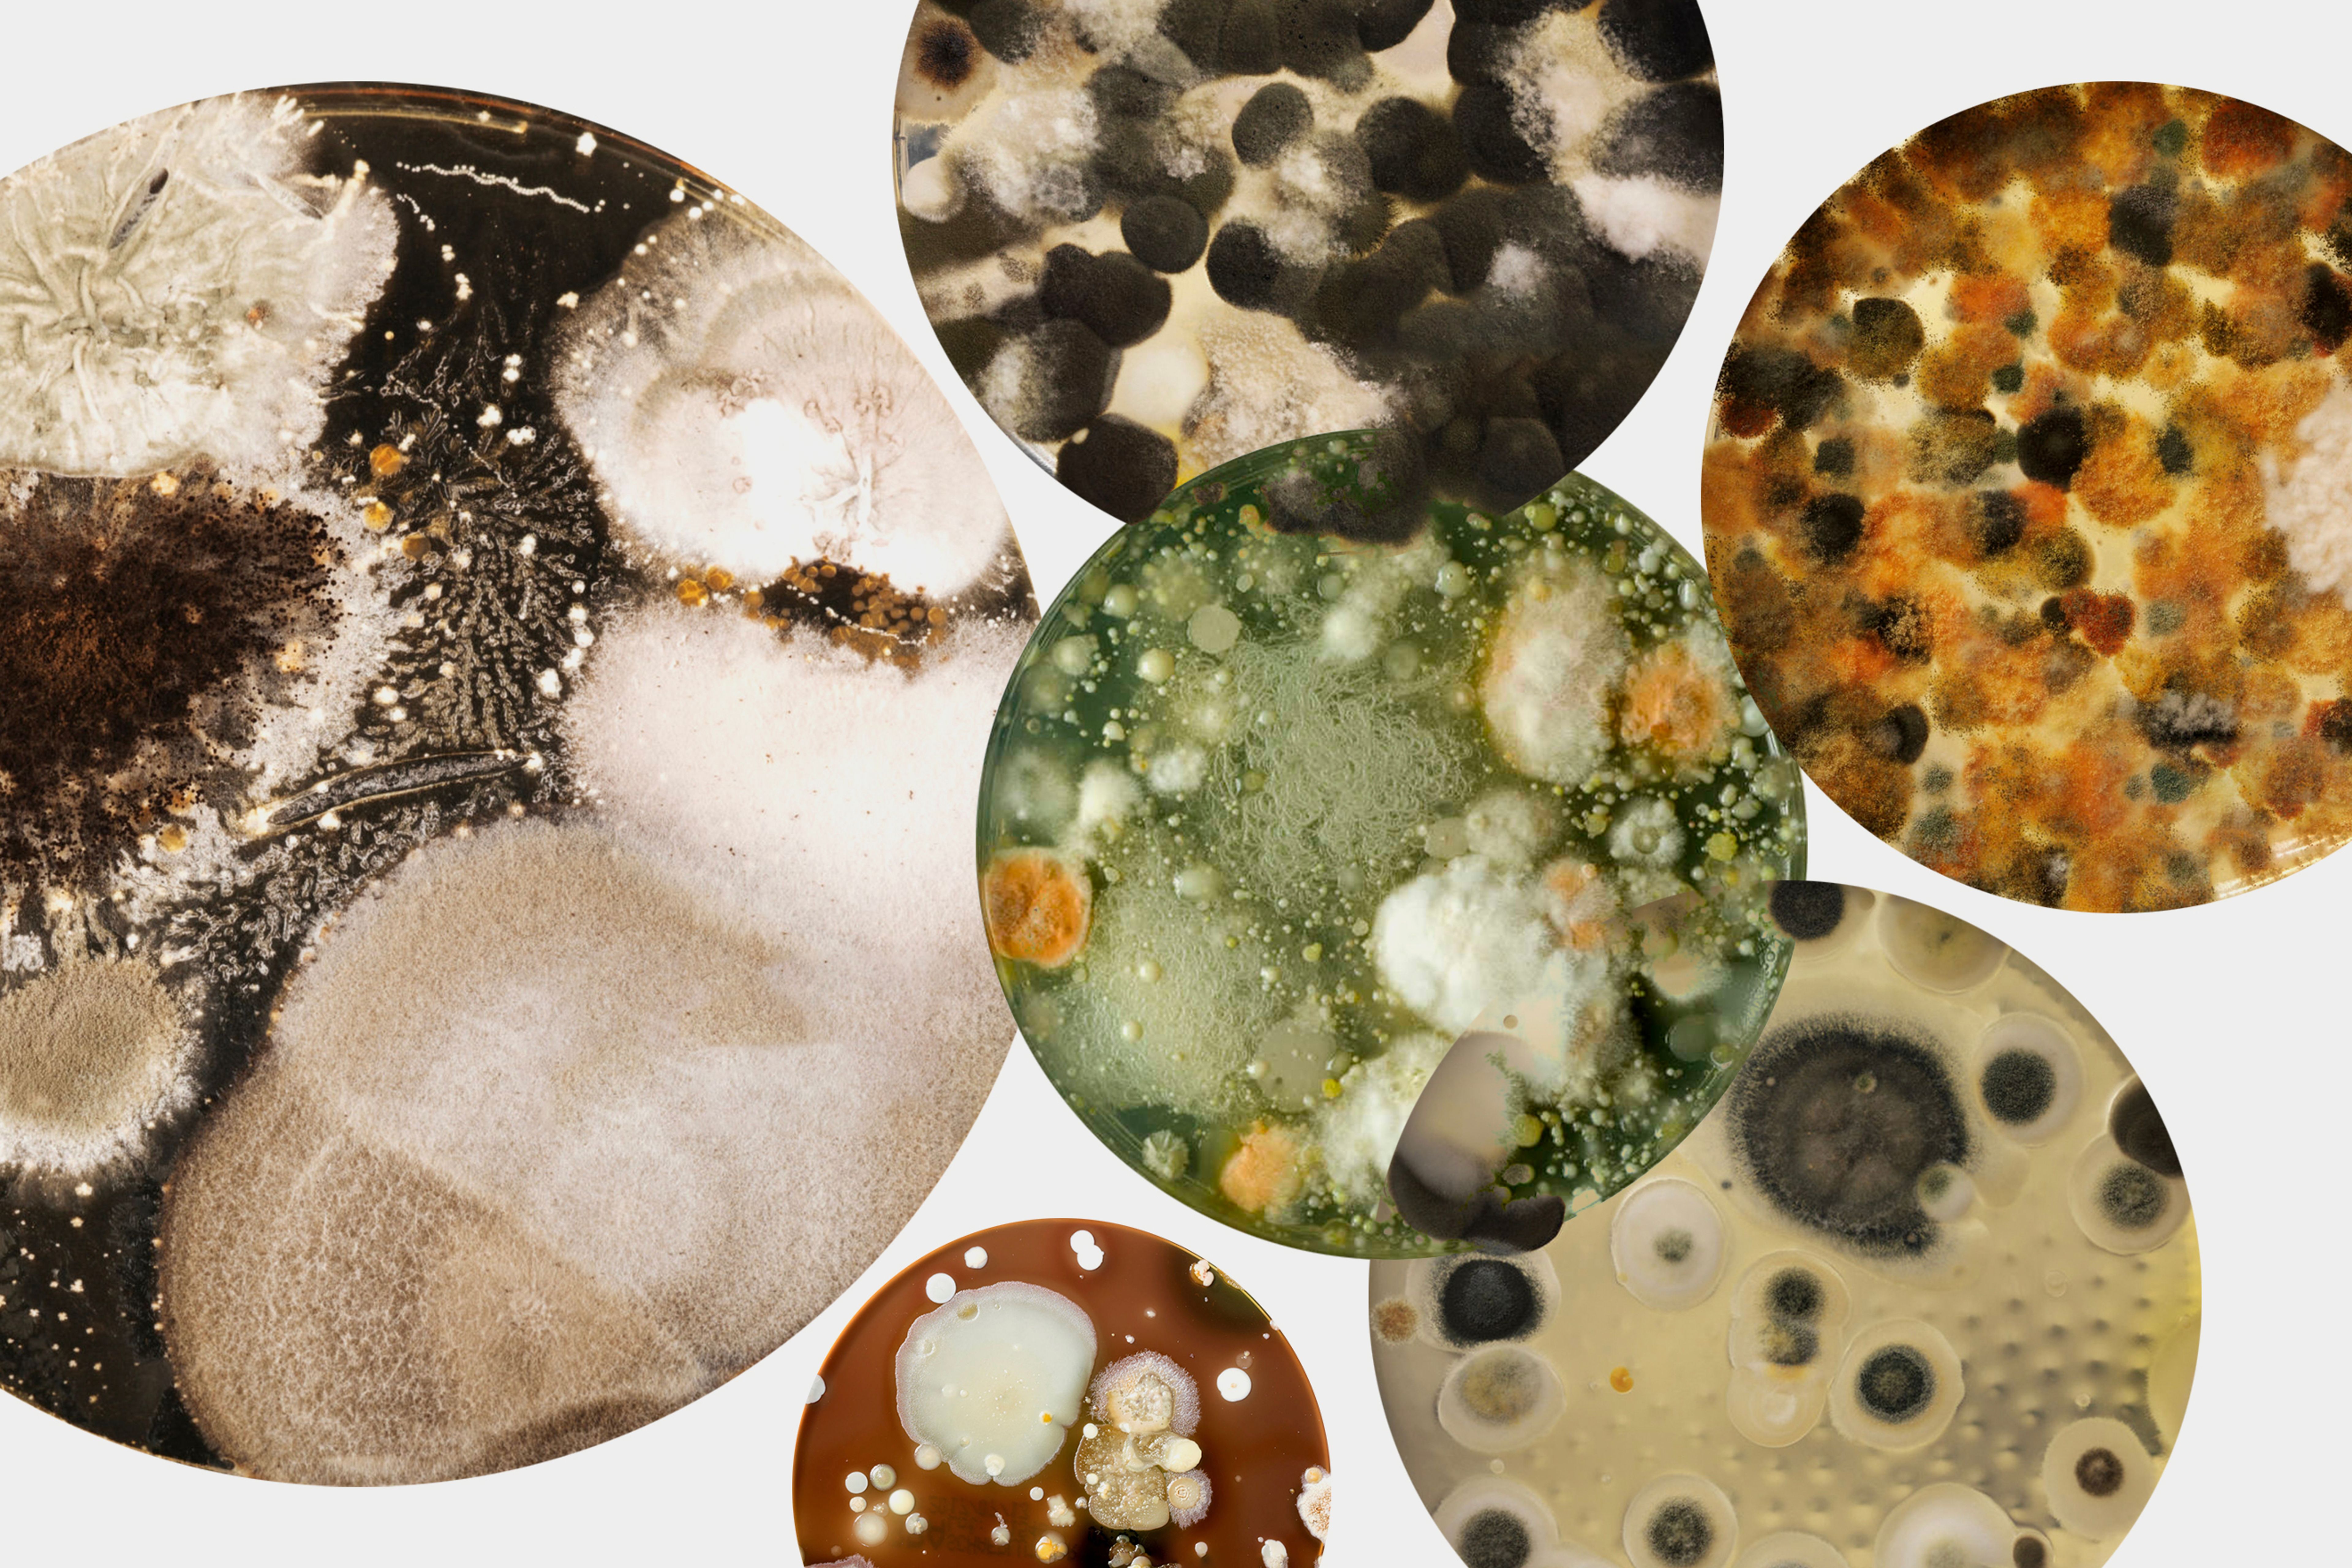 Collage of petri dishes with bacteria culture